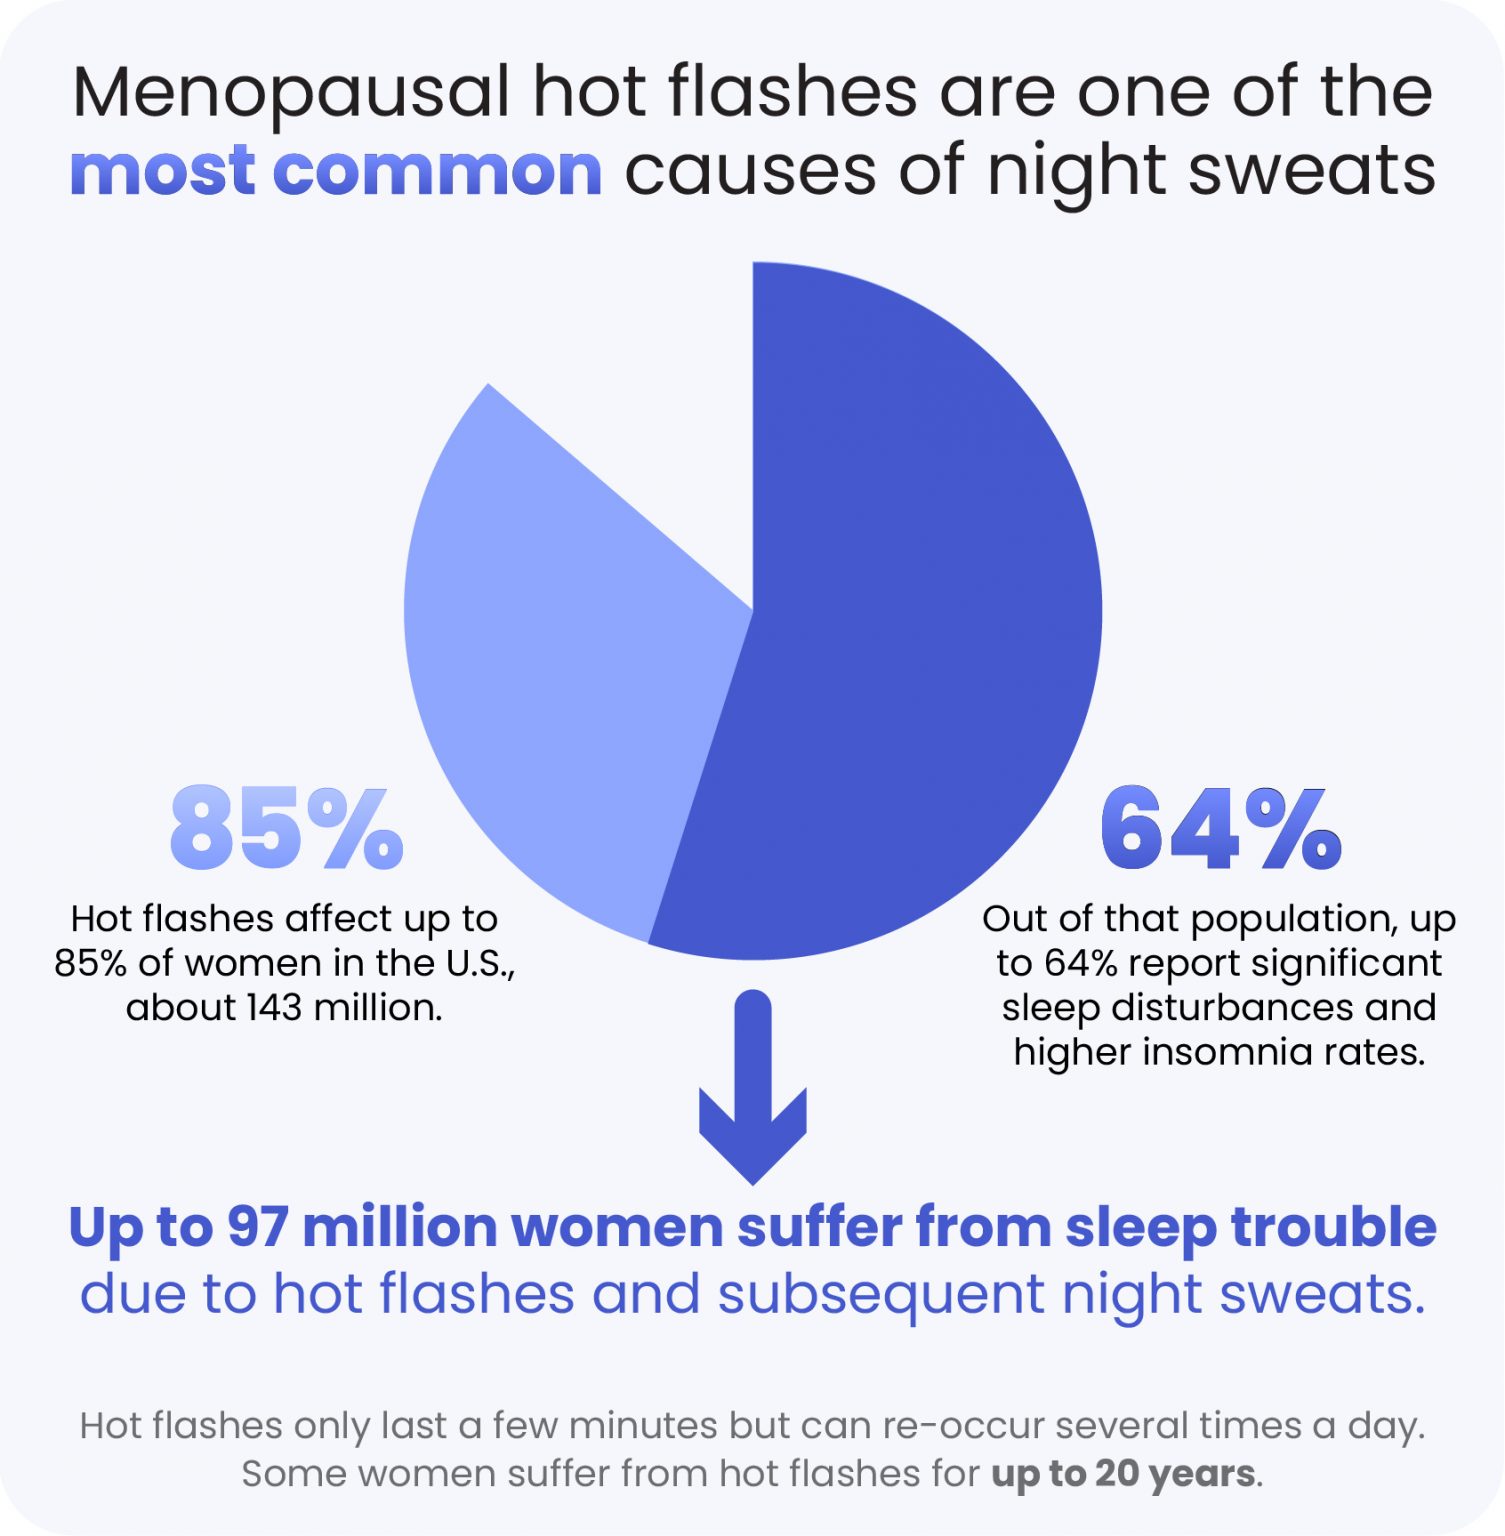 Pie chart of number of U.S. women affected by hot flashes and report sleep disturbances where 97 million women report sleep trouble.